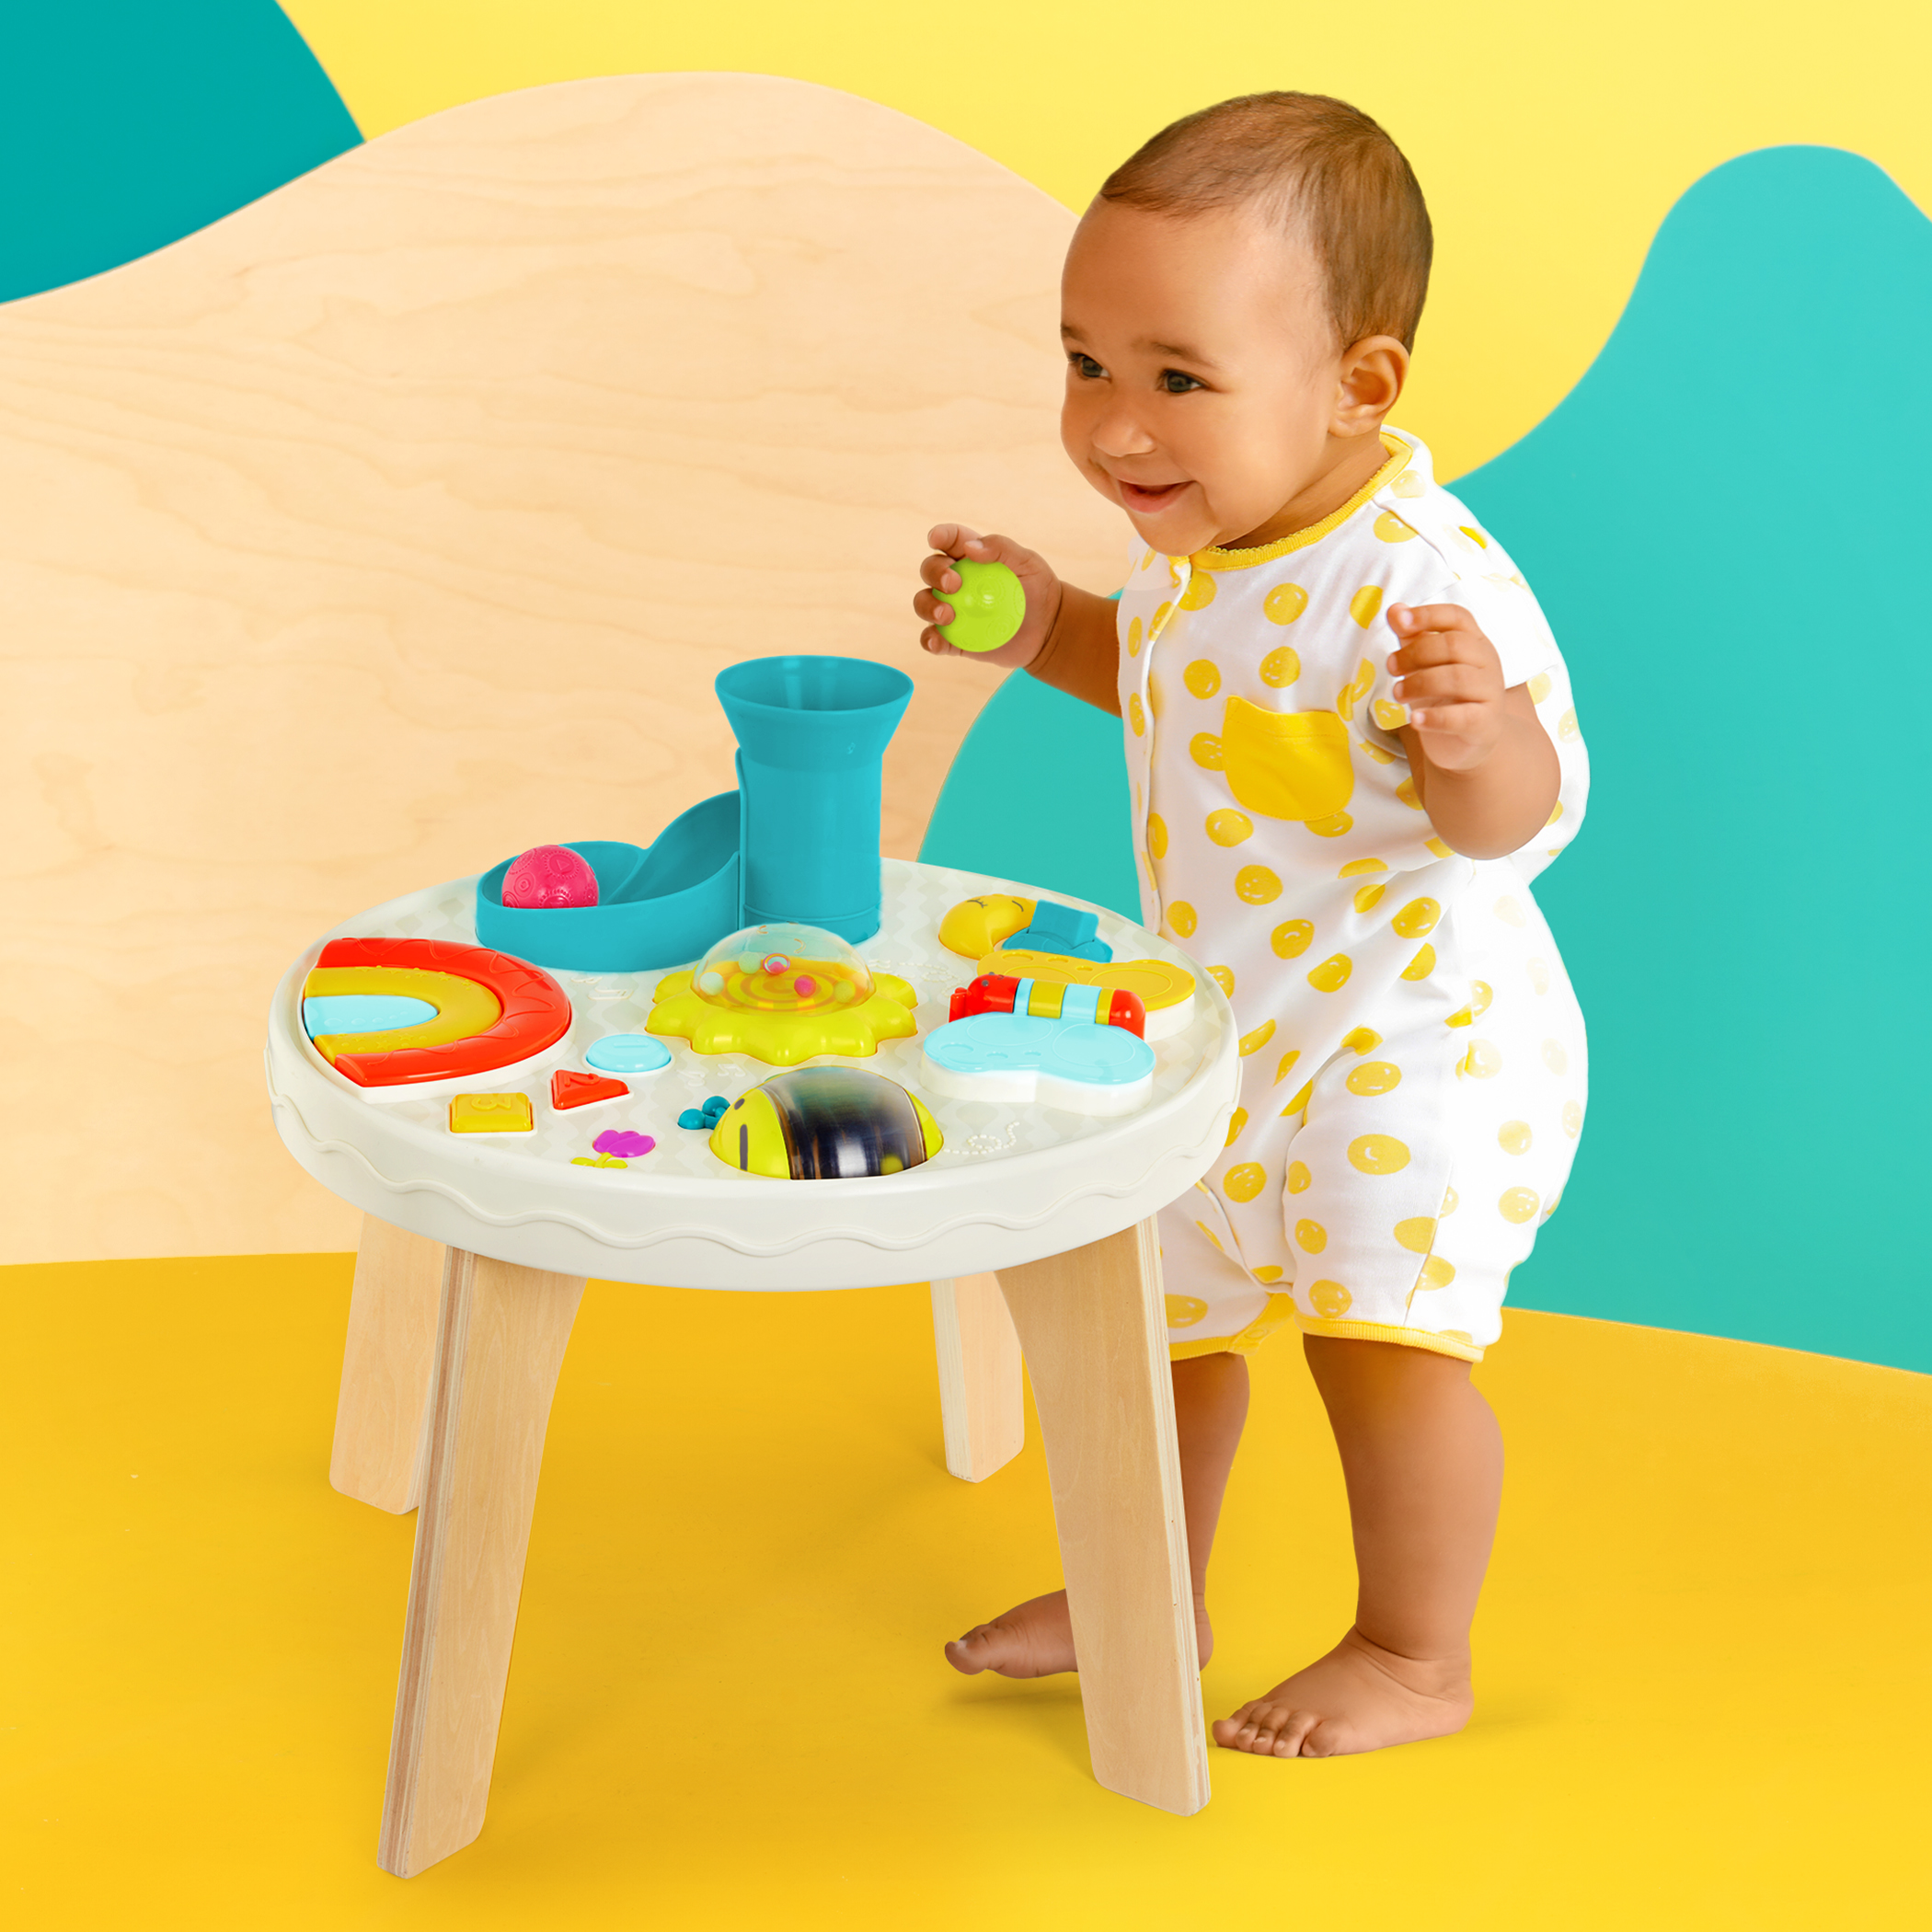 CARRY-PLAY Kids Activity Table for Sensory, STEAM, and Standing